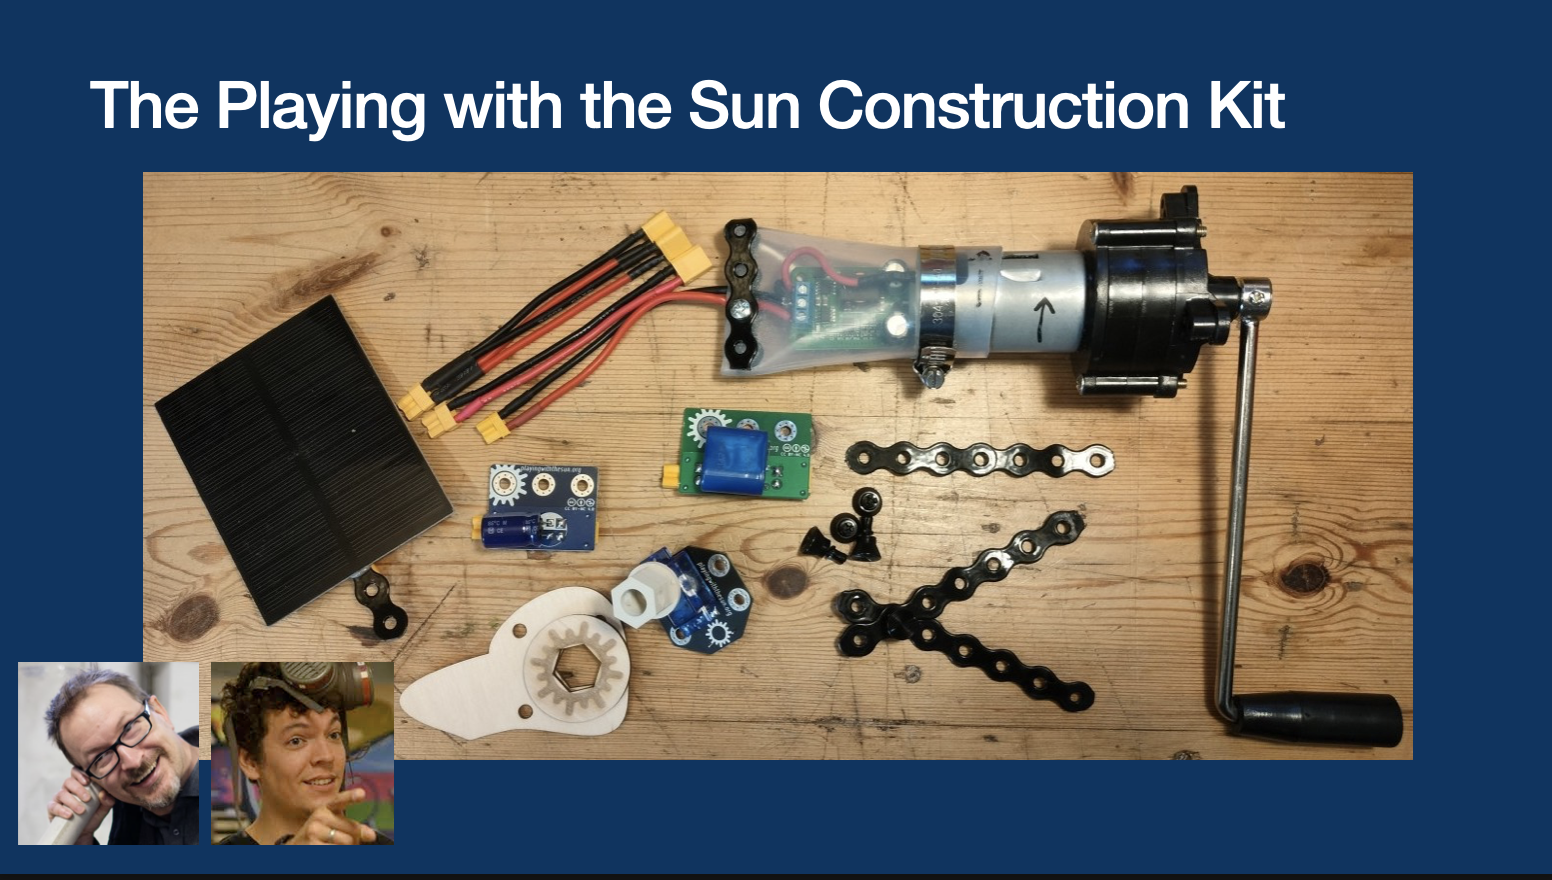 The elements of the open-source Playing with the Sun construction kit at time of publication.